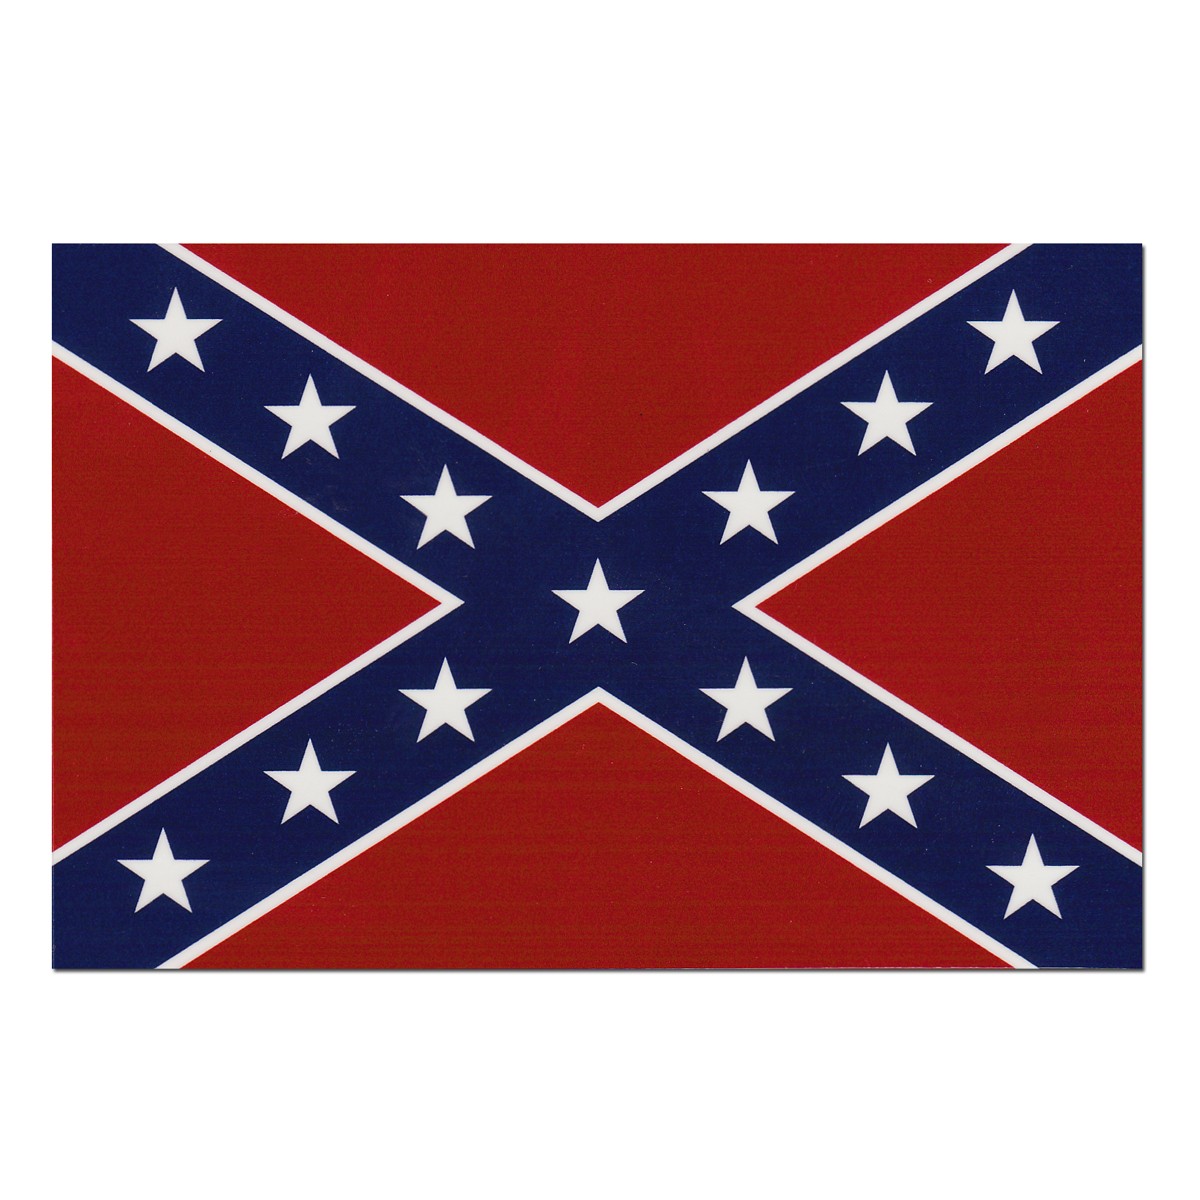 Clip Arts Related To : confederate flag. 